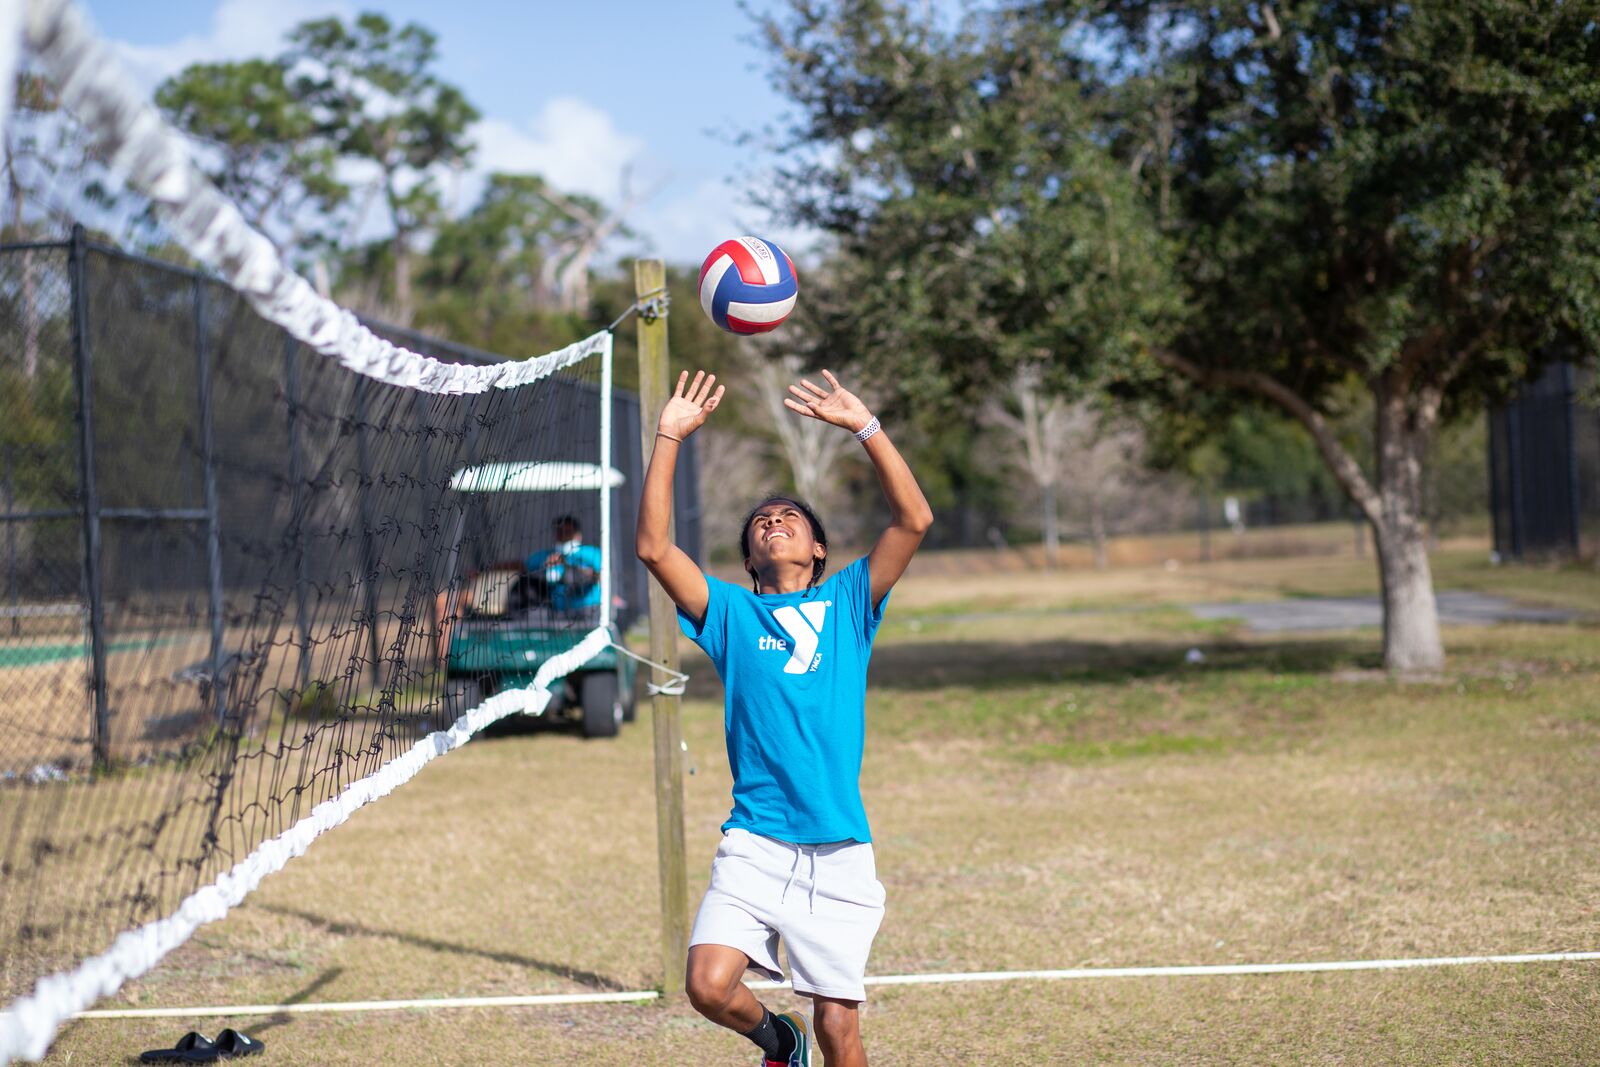 Teenager setting a volleyball at an outdoor volleyball court while wearing a Y t-shirt